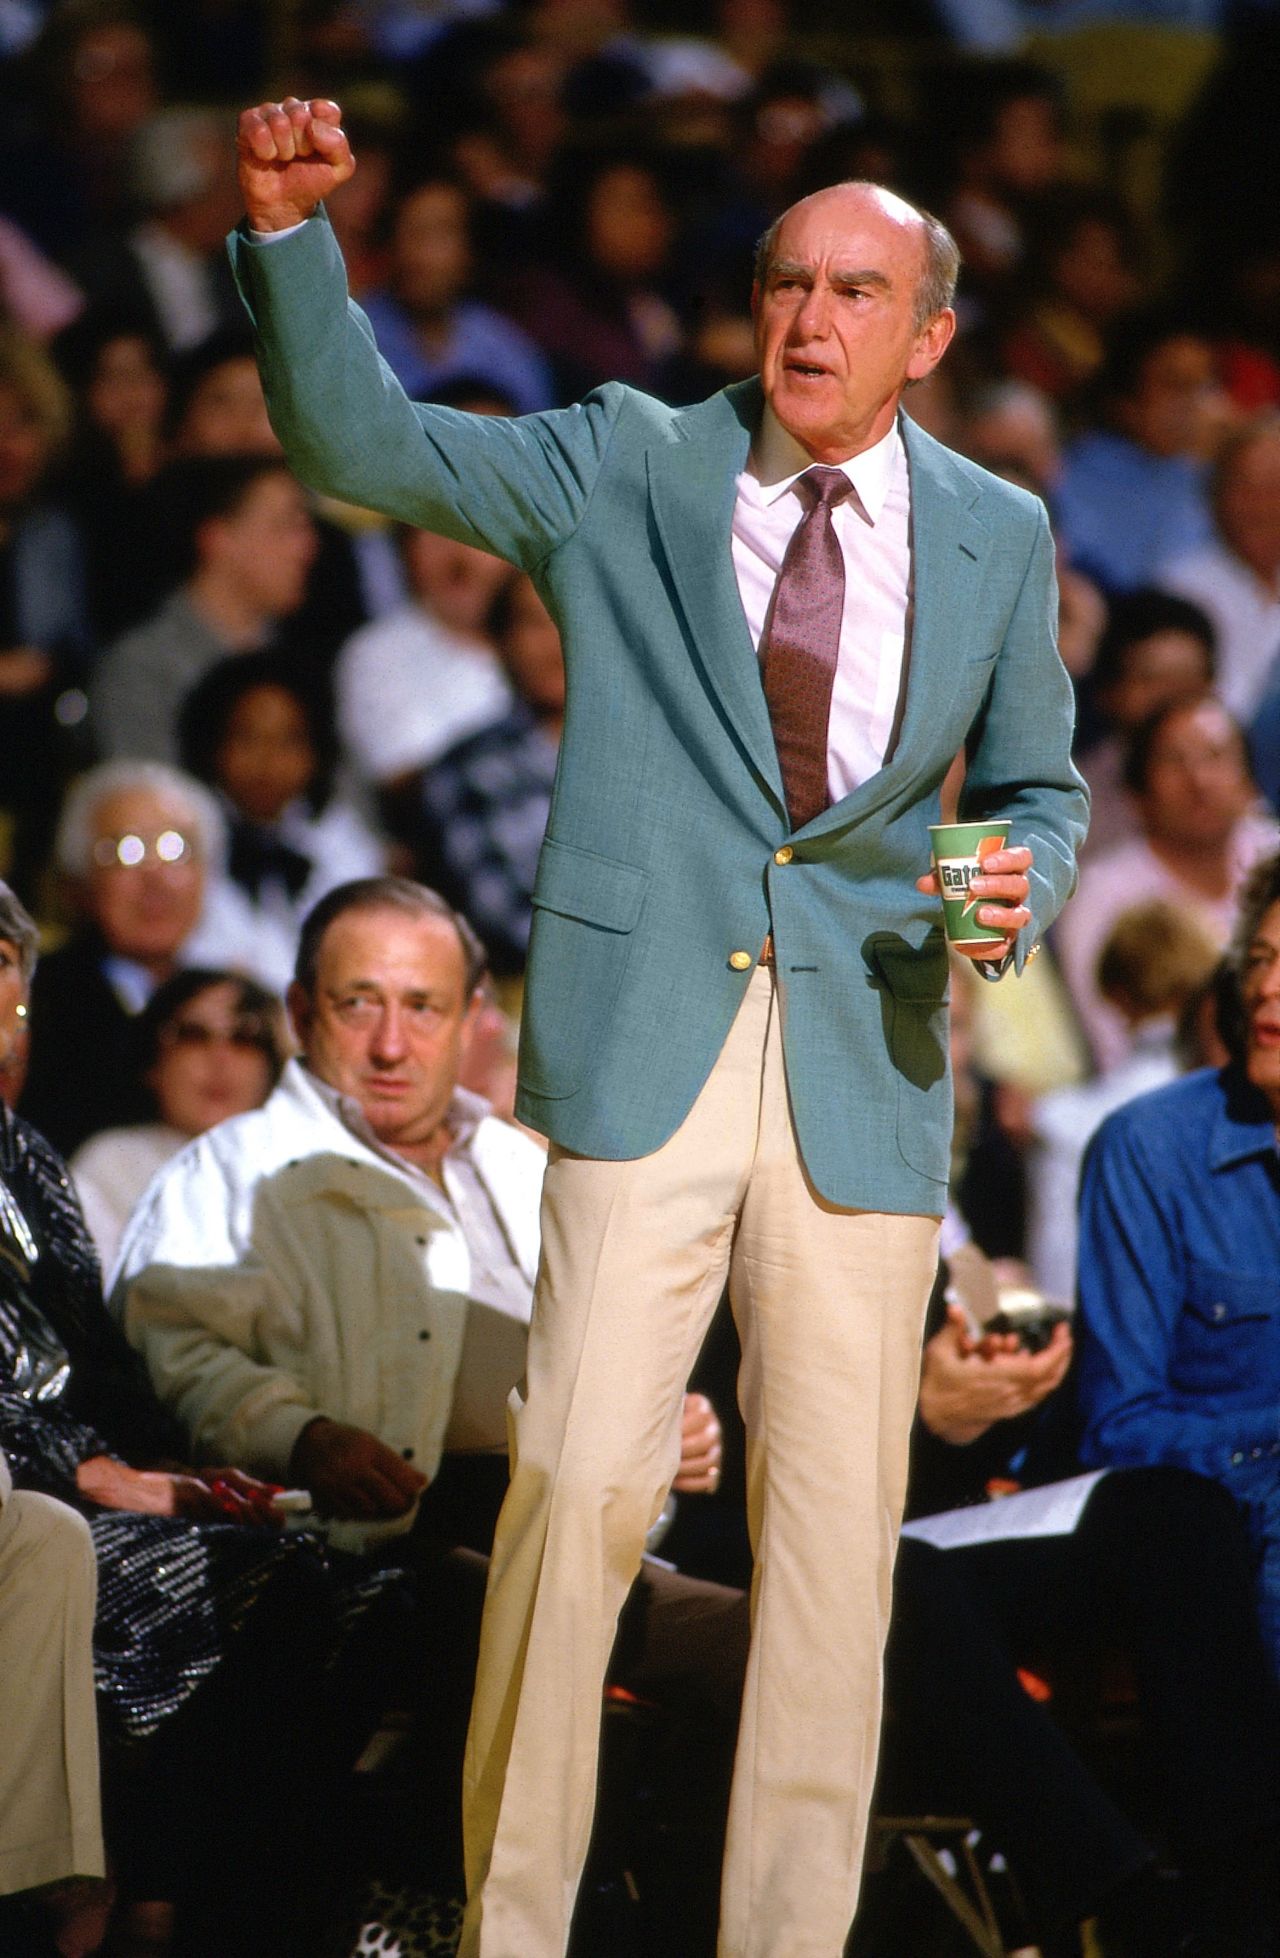 Hall of Fame basketball coach <a href="http://www.cnn.com/2014/04/28/sport/jack-ramsay-dies/index.html?hpt=hp_t2">John "Dr. Jack" Ramsay</a>, who became a television analyst years after winning a league championship with the Portland Trail Blazers, died on April 28, according to his longtime employer ESPN. Ramsay was 89.